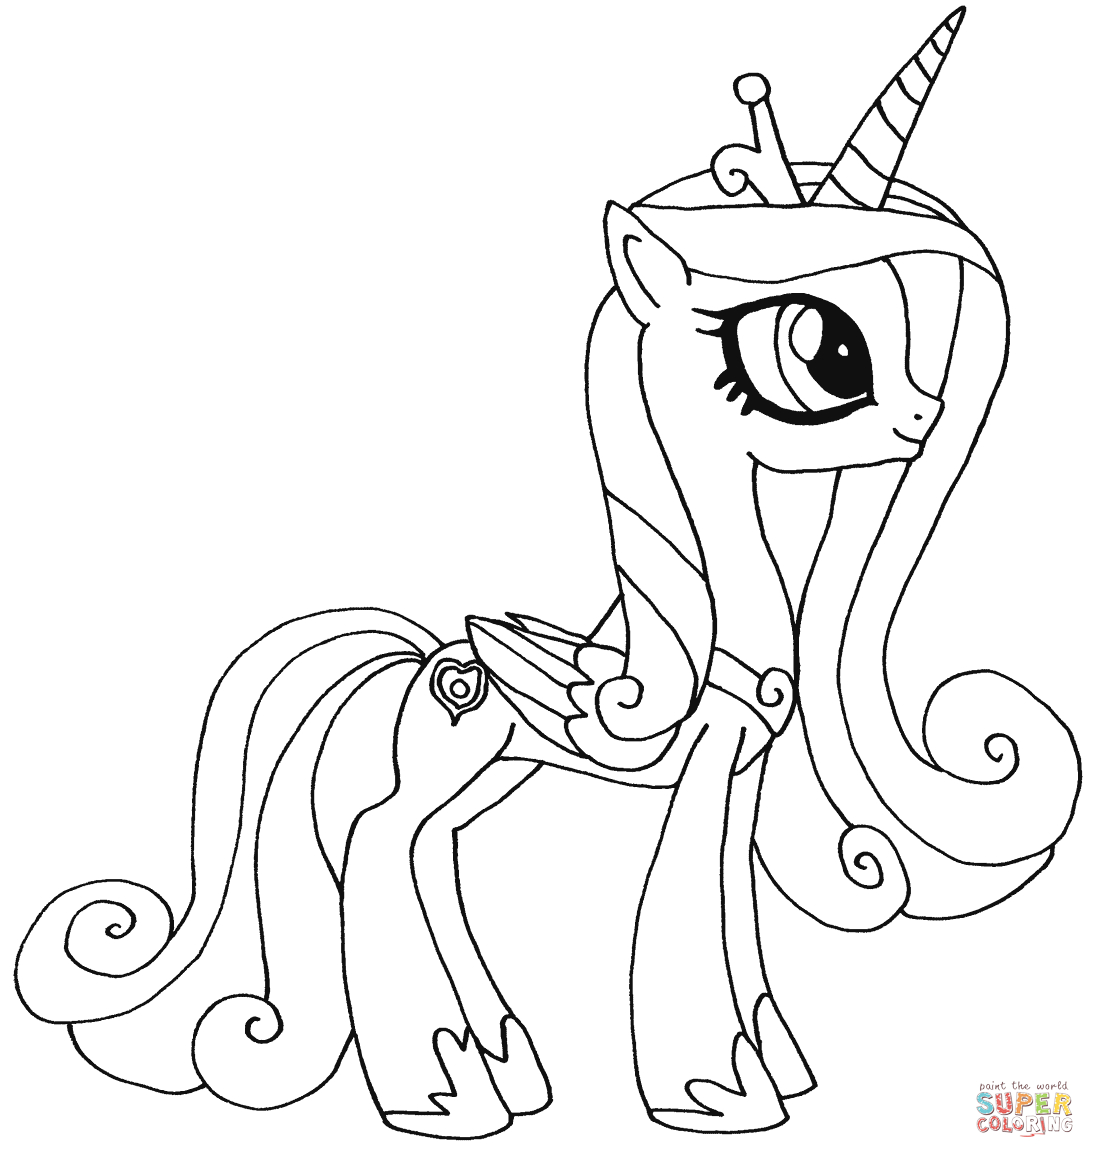 Mlp Coloring Pages Rarity My Little Pony Coloring Pages Free Coloring Pages